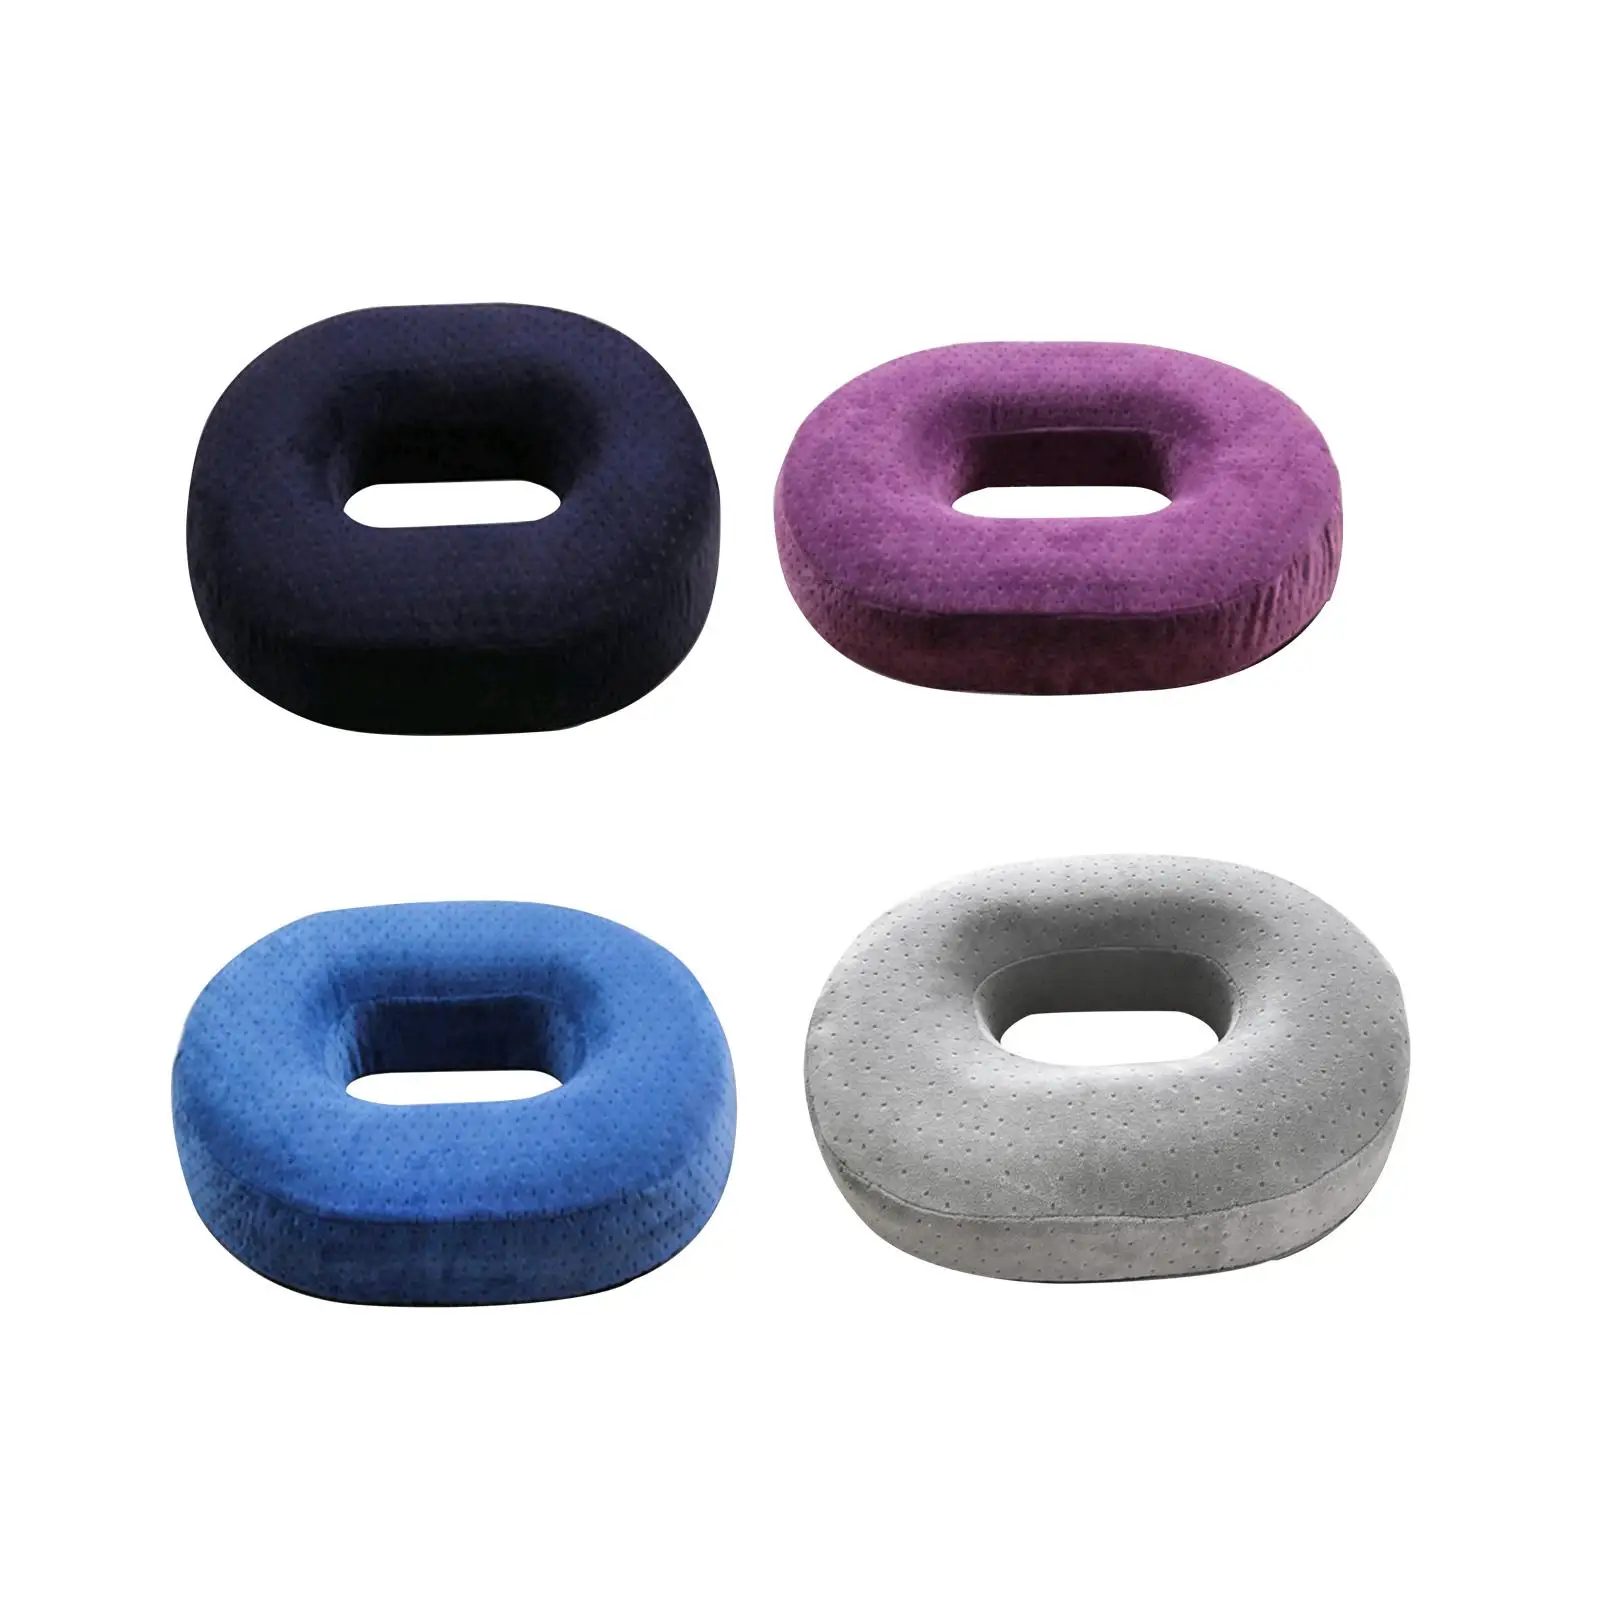 Sitting Pad Comfortable Durable Memory Foam Support Easy to Clean Seat Pad Cushion for Chair Office Home Long Time Sitting Car